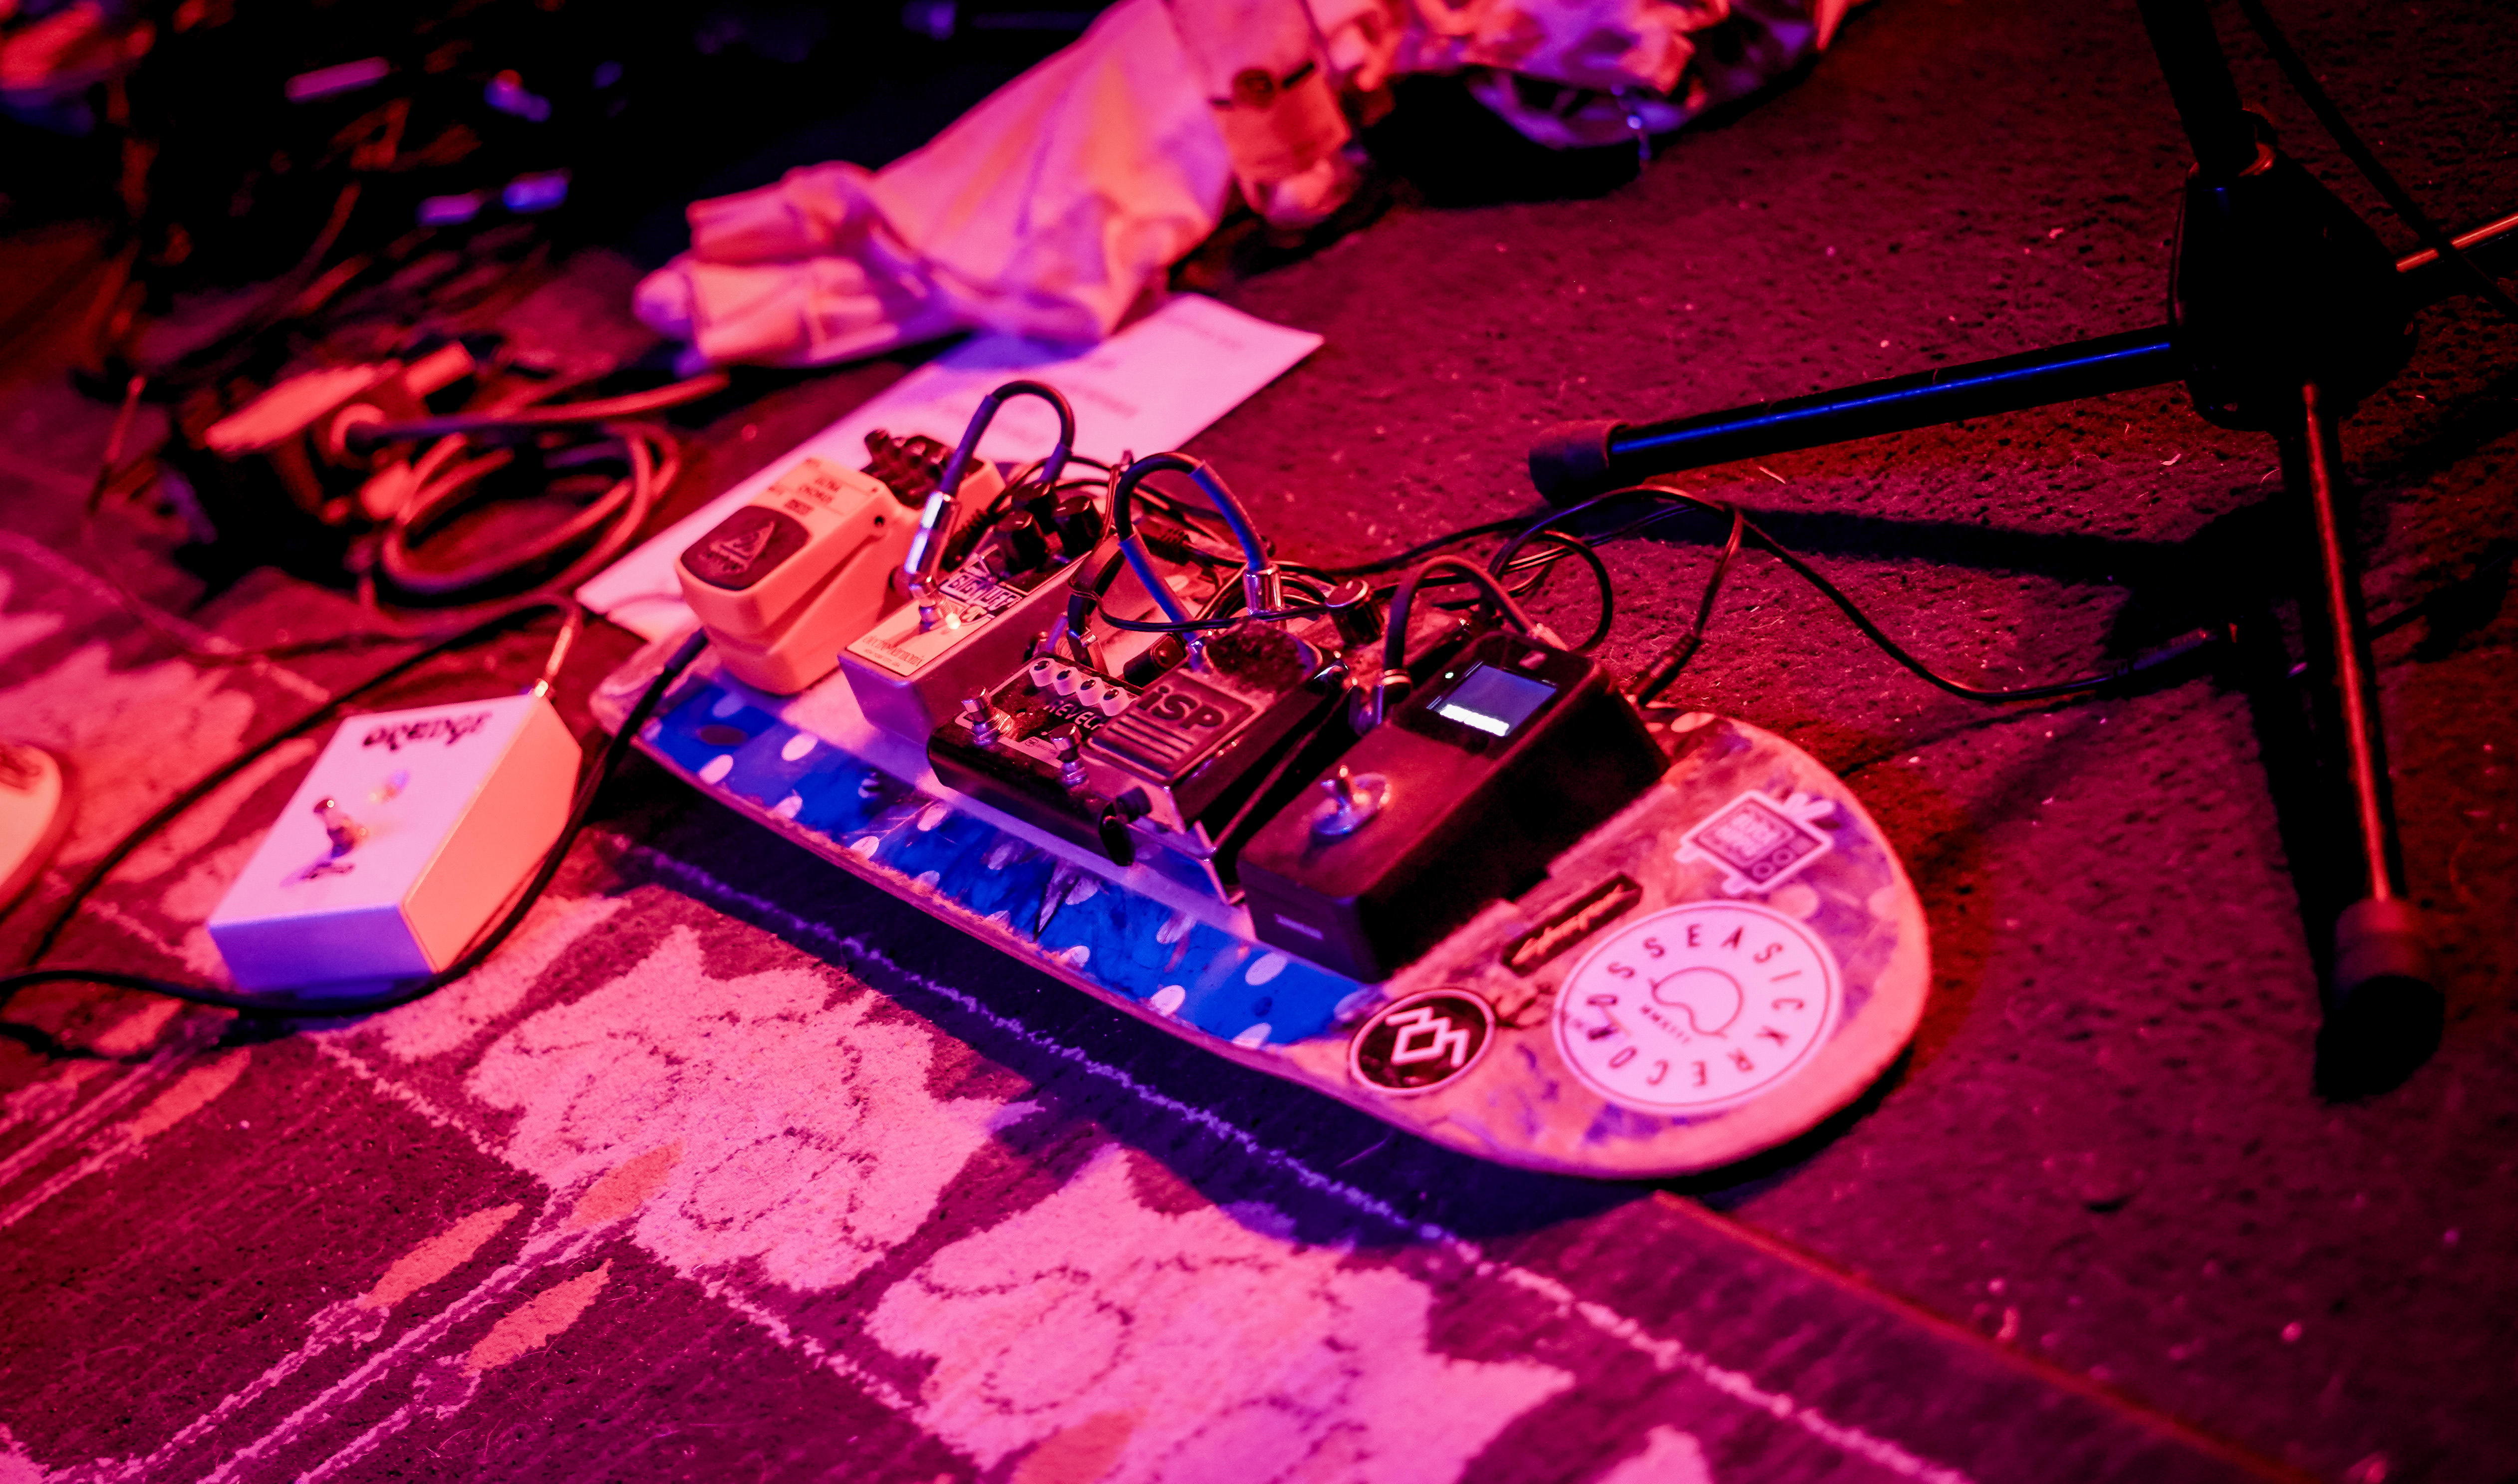 A pedal board made out of a skateboard